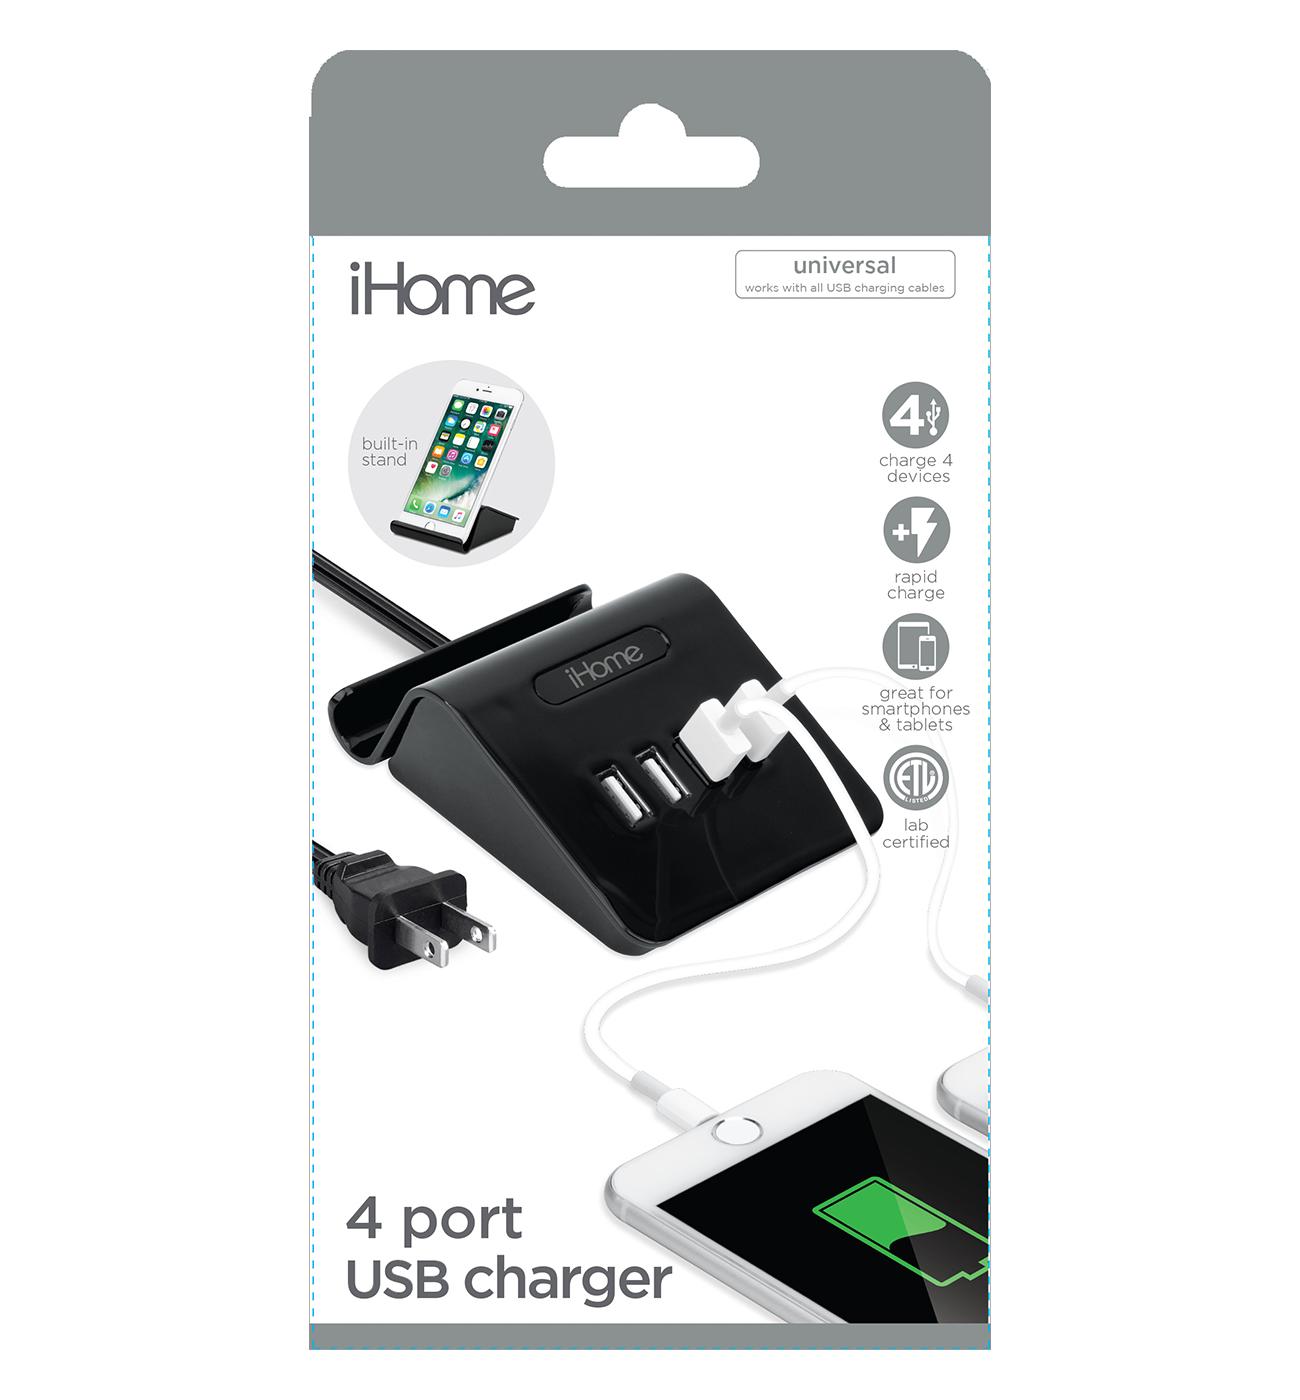 iHome 4-Port USB Charging Stand - Black; image 1 of 2